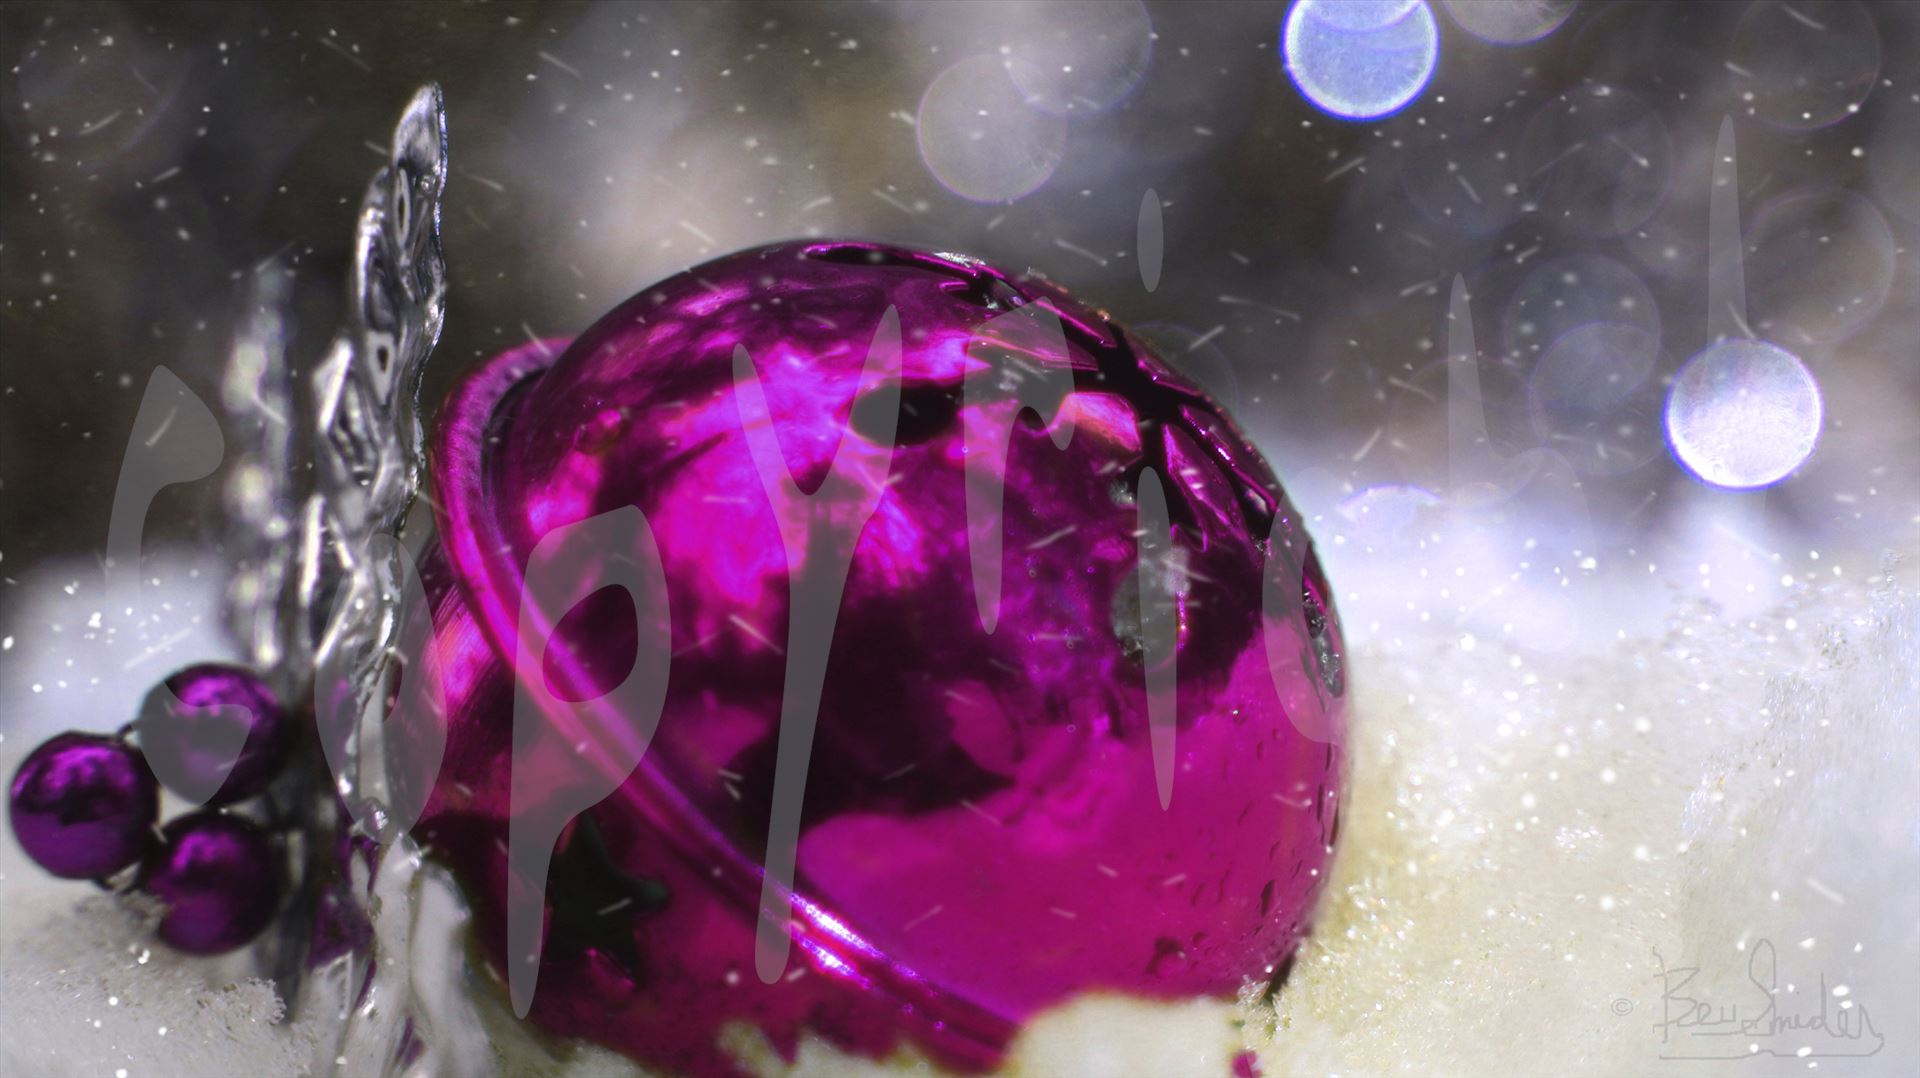 Fuschia Christmas Ball 6657 Fuschia Christmas Ball in the snow with bokeh background by Snookies Place of Wildlife and Nature